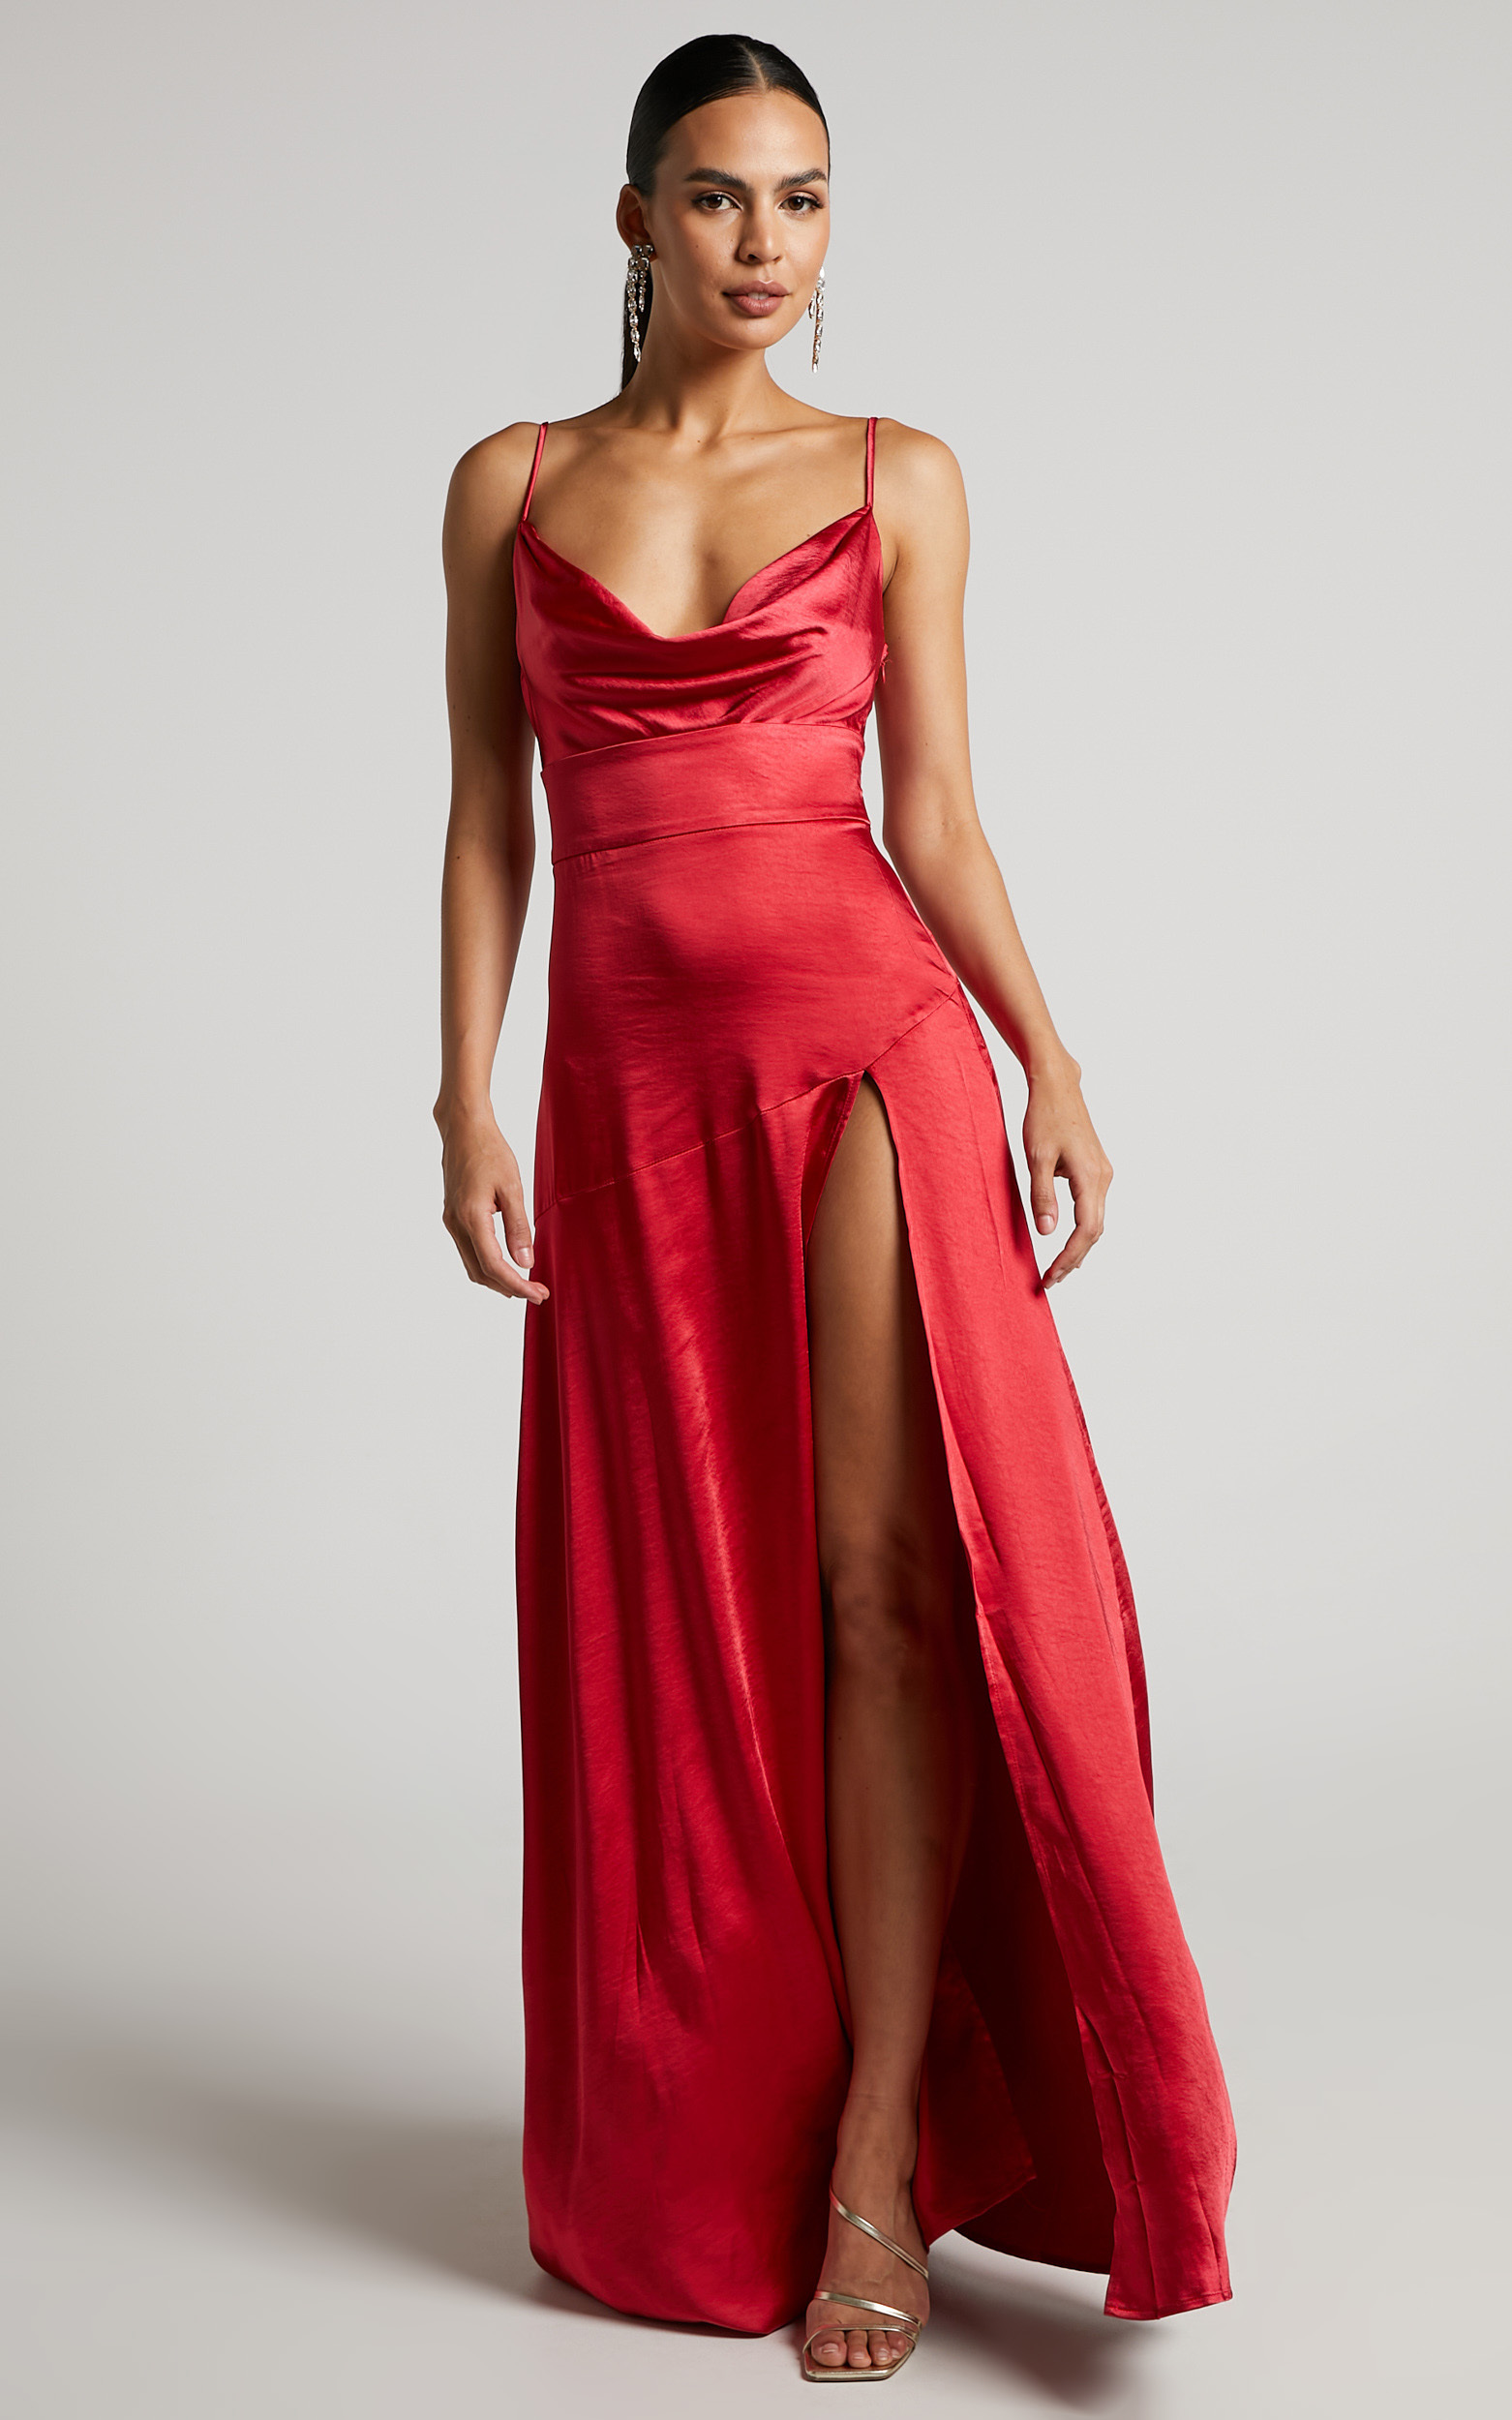 Cleopathra Maxi Dress - High Split Cowl Neck Dress in Red - 04, RED1, hi-res image number null